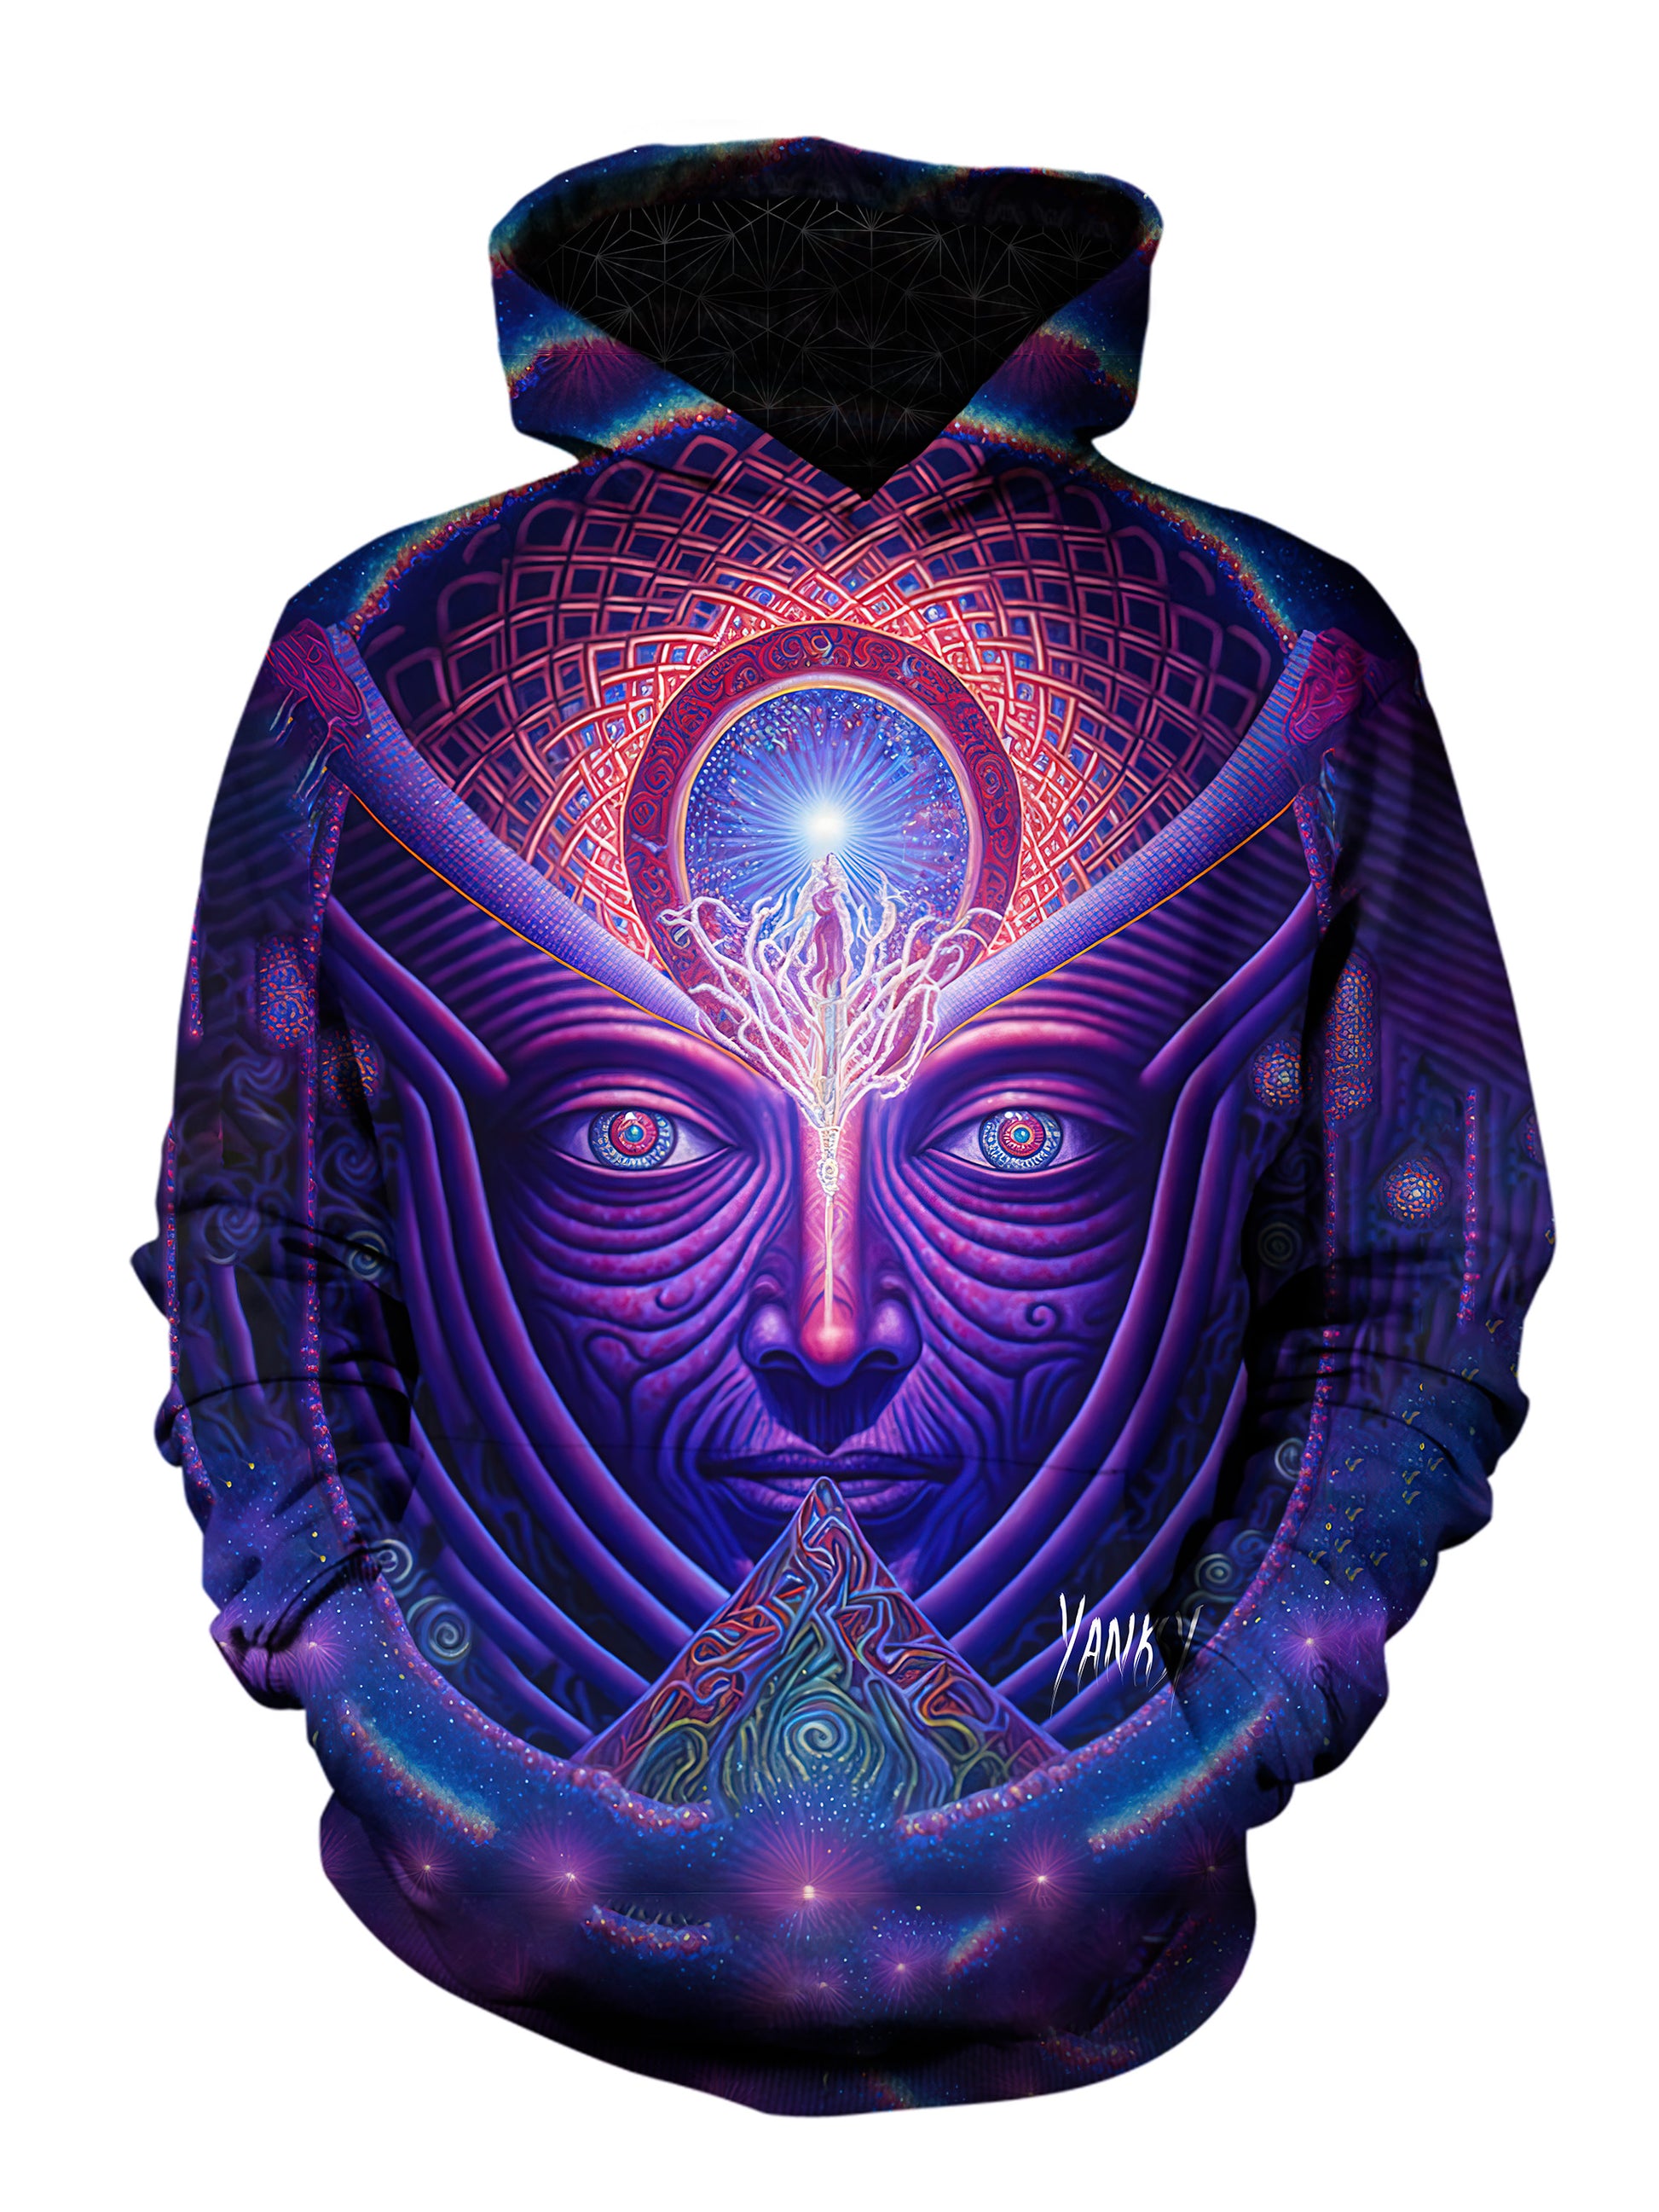 Express your creativity and individuality with this one-of-a-kind trippy pullover hoodie